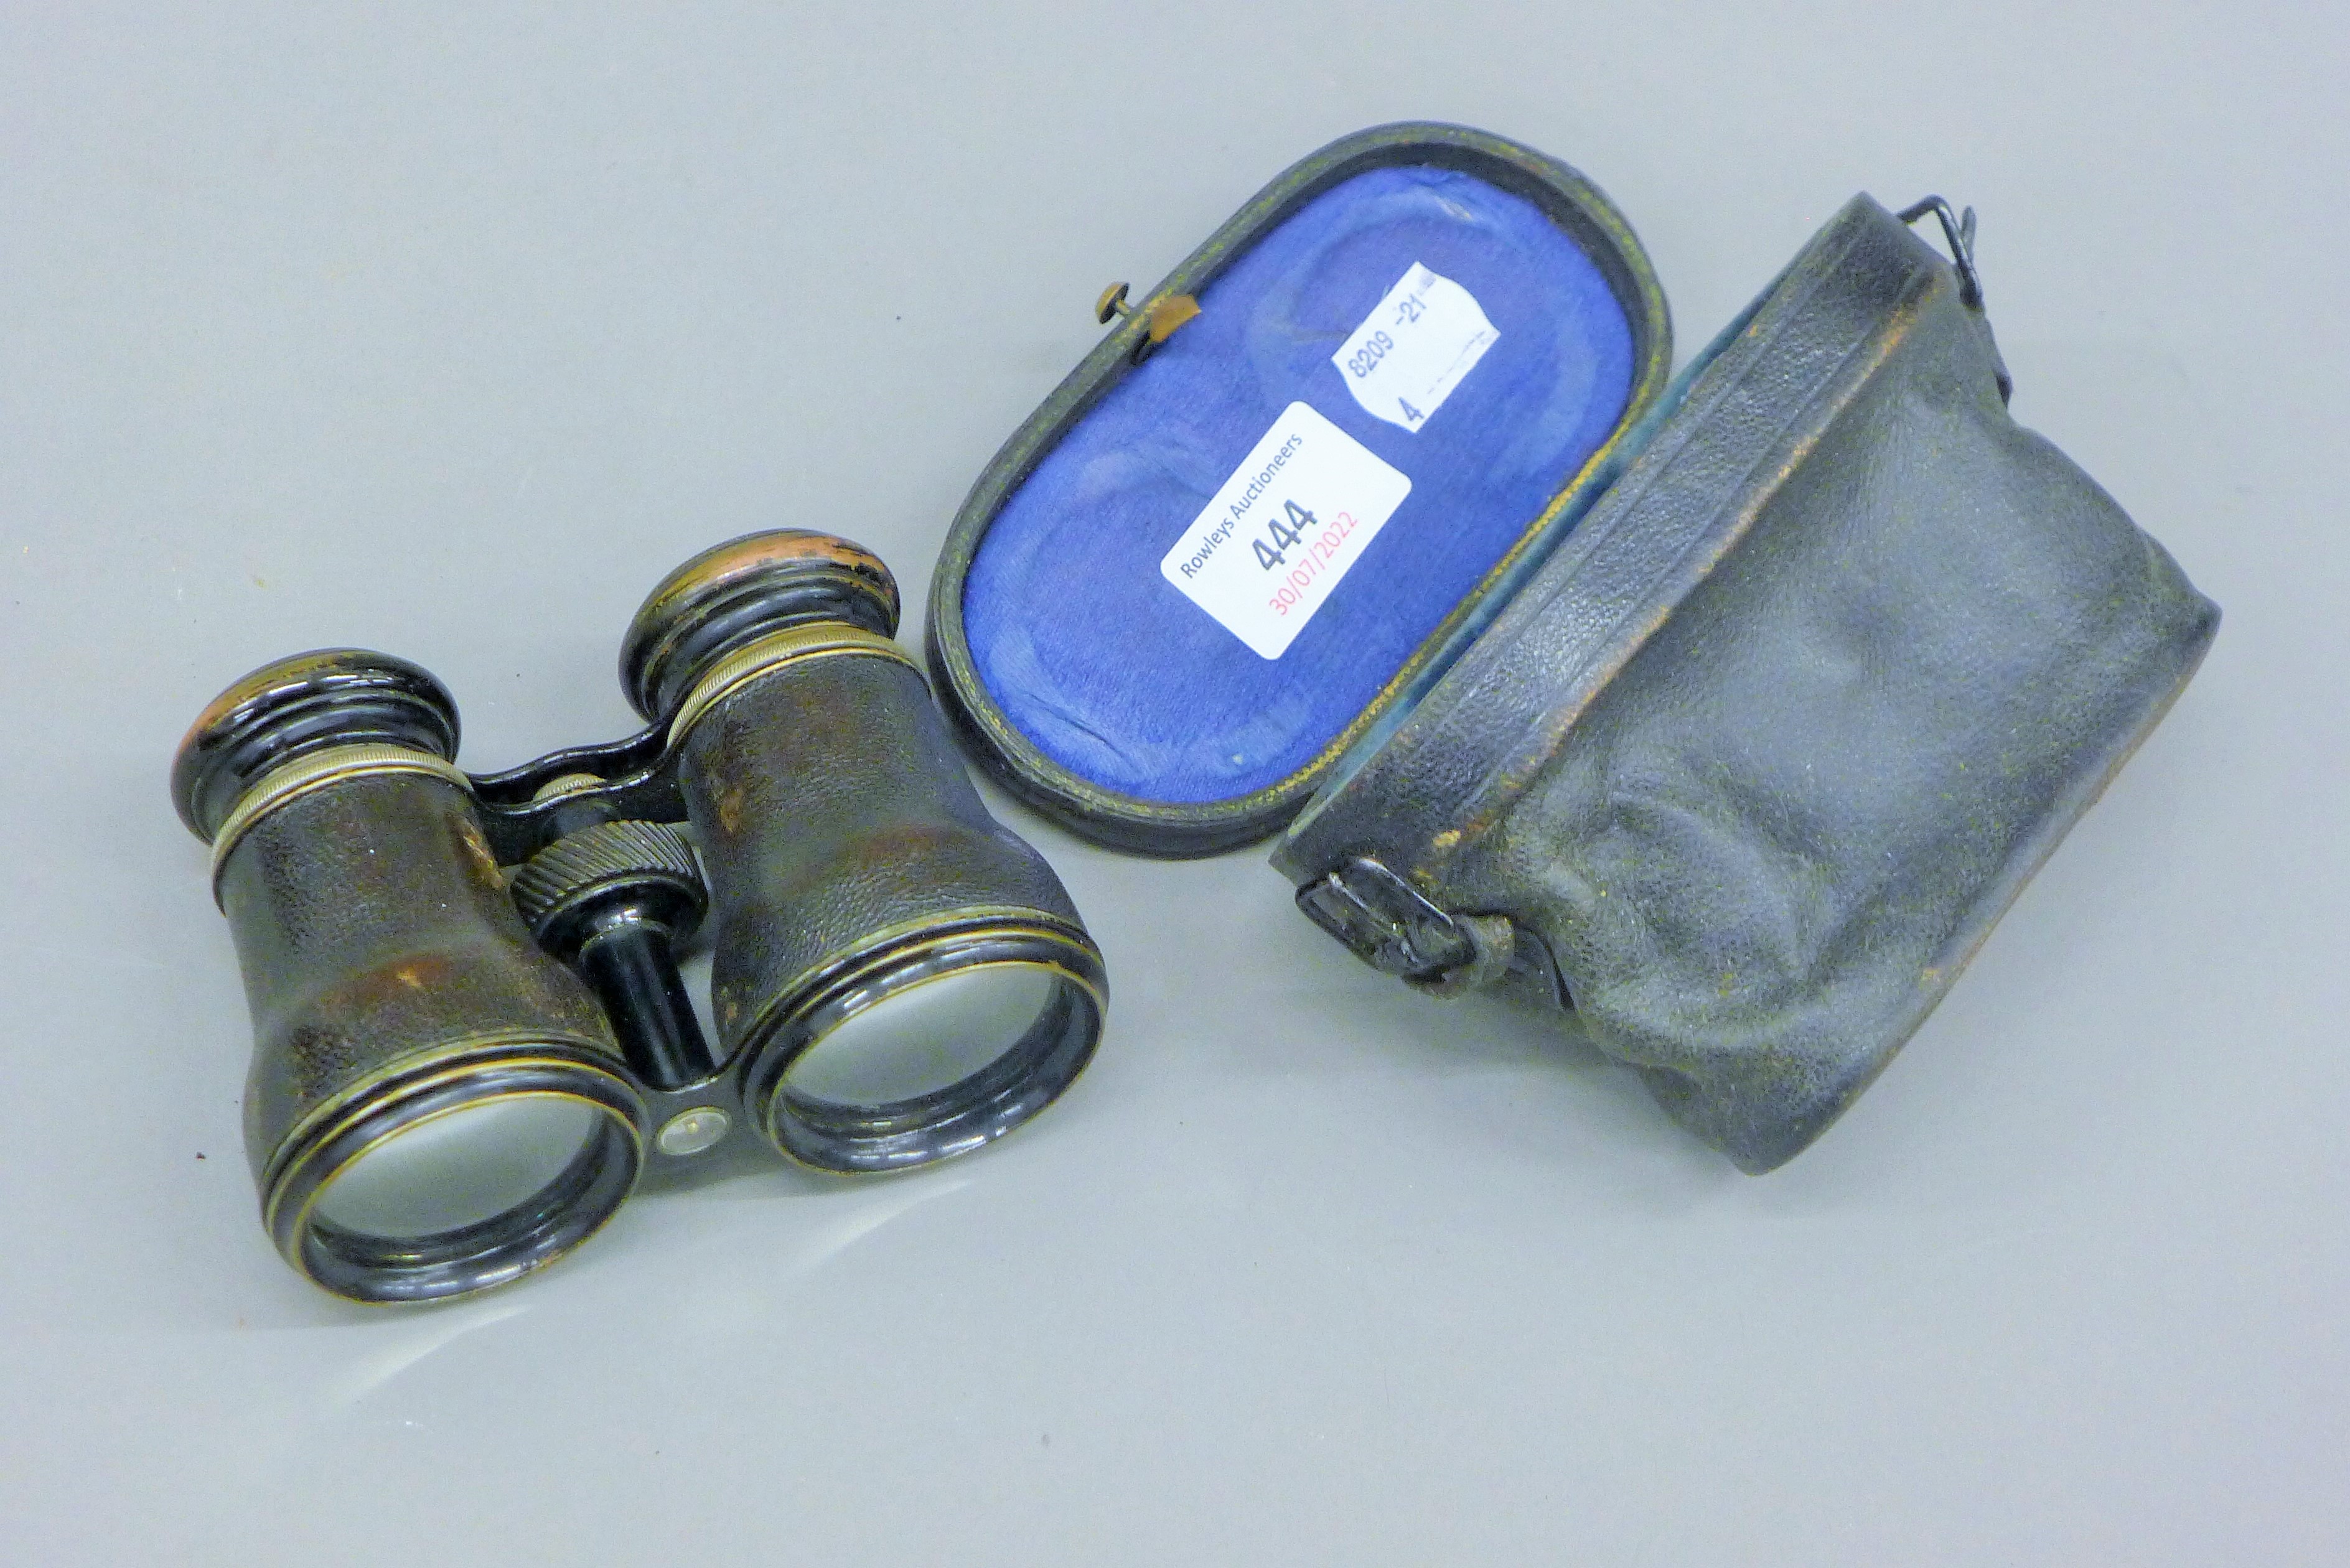 A pair of field glasses with inset compass, case. 13.5 cm wide overall. - Image 4 of 5